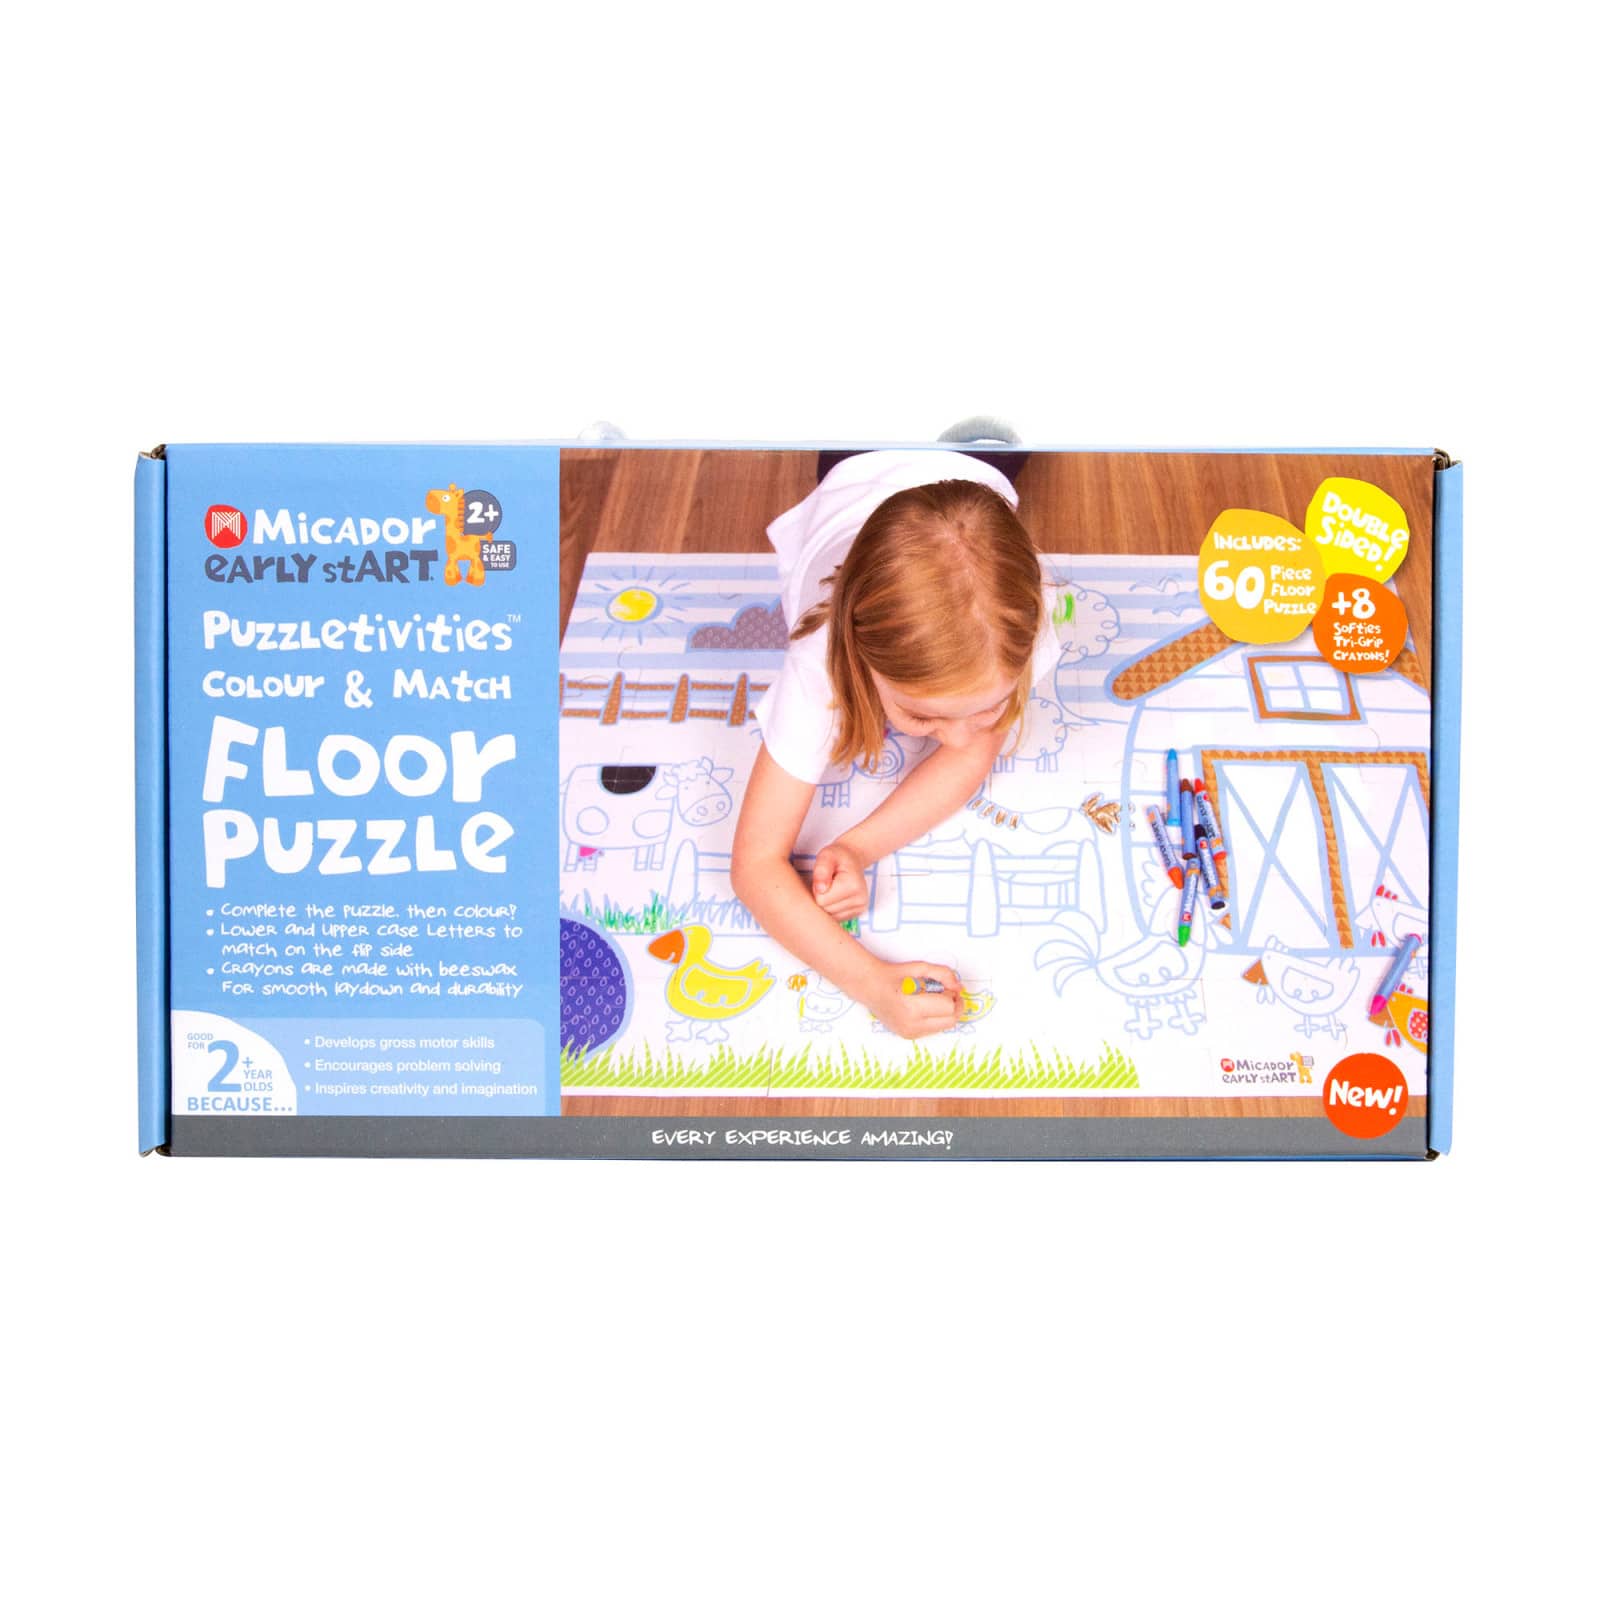 6 Pack: Micador&#xAE; early stART&#xAE; Puzzletivities&#x2122; Floor Puzzle Pack